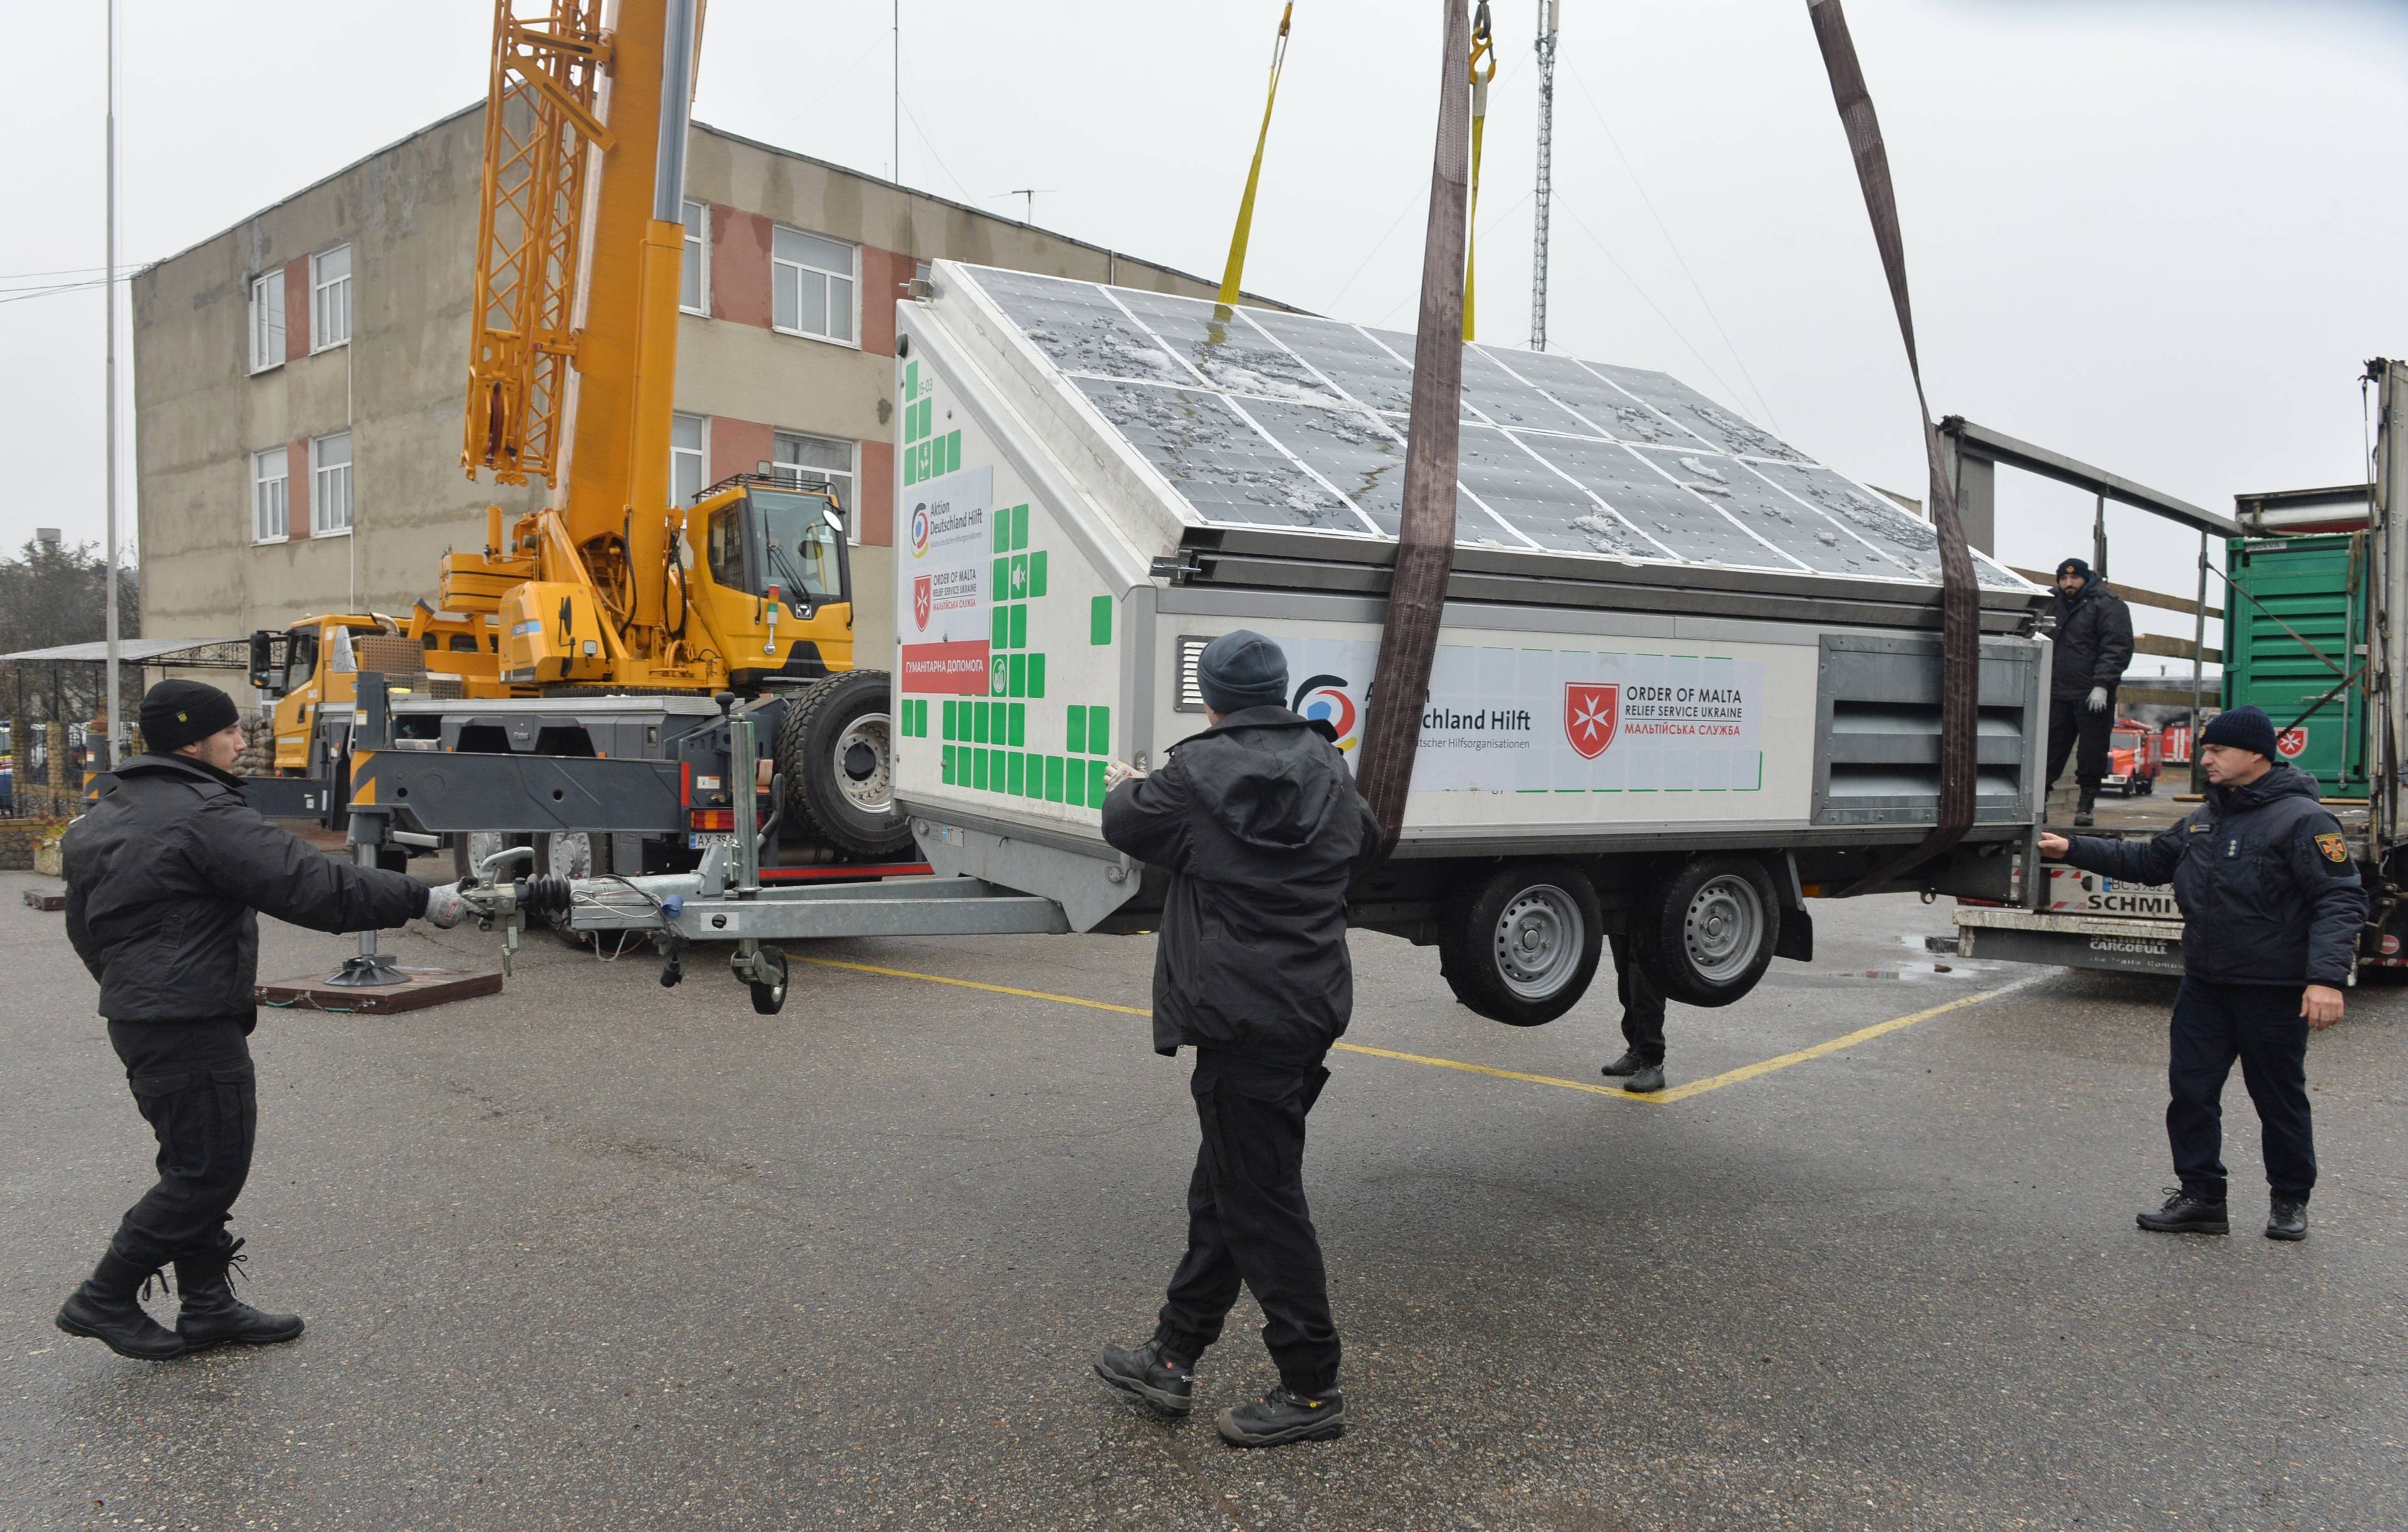 Employees of the State Emergency Service of Ukraine unload mobile power generating station as part of international humanitarian aid in the city of Kharkiv on November 21, 2022, amid the Russian military invasion of Ukraine. - The station will be used to provide electricity to rescuers and the local population in areas where there is no power supply due to the destruction of energy infrastructure facilities by the Russian army. (Photo by SERGEY BOBOK / AFP)